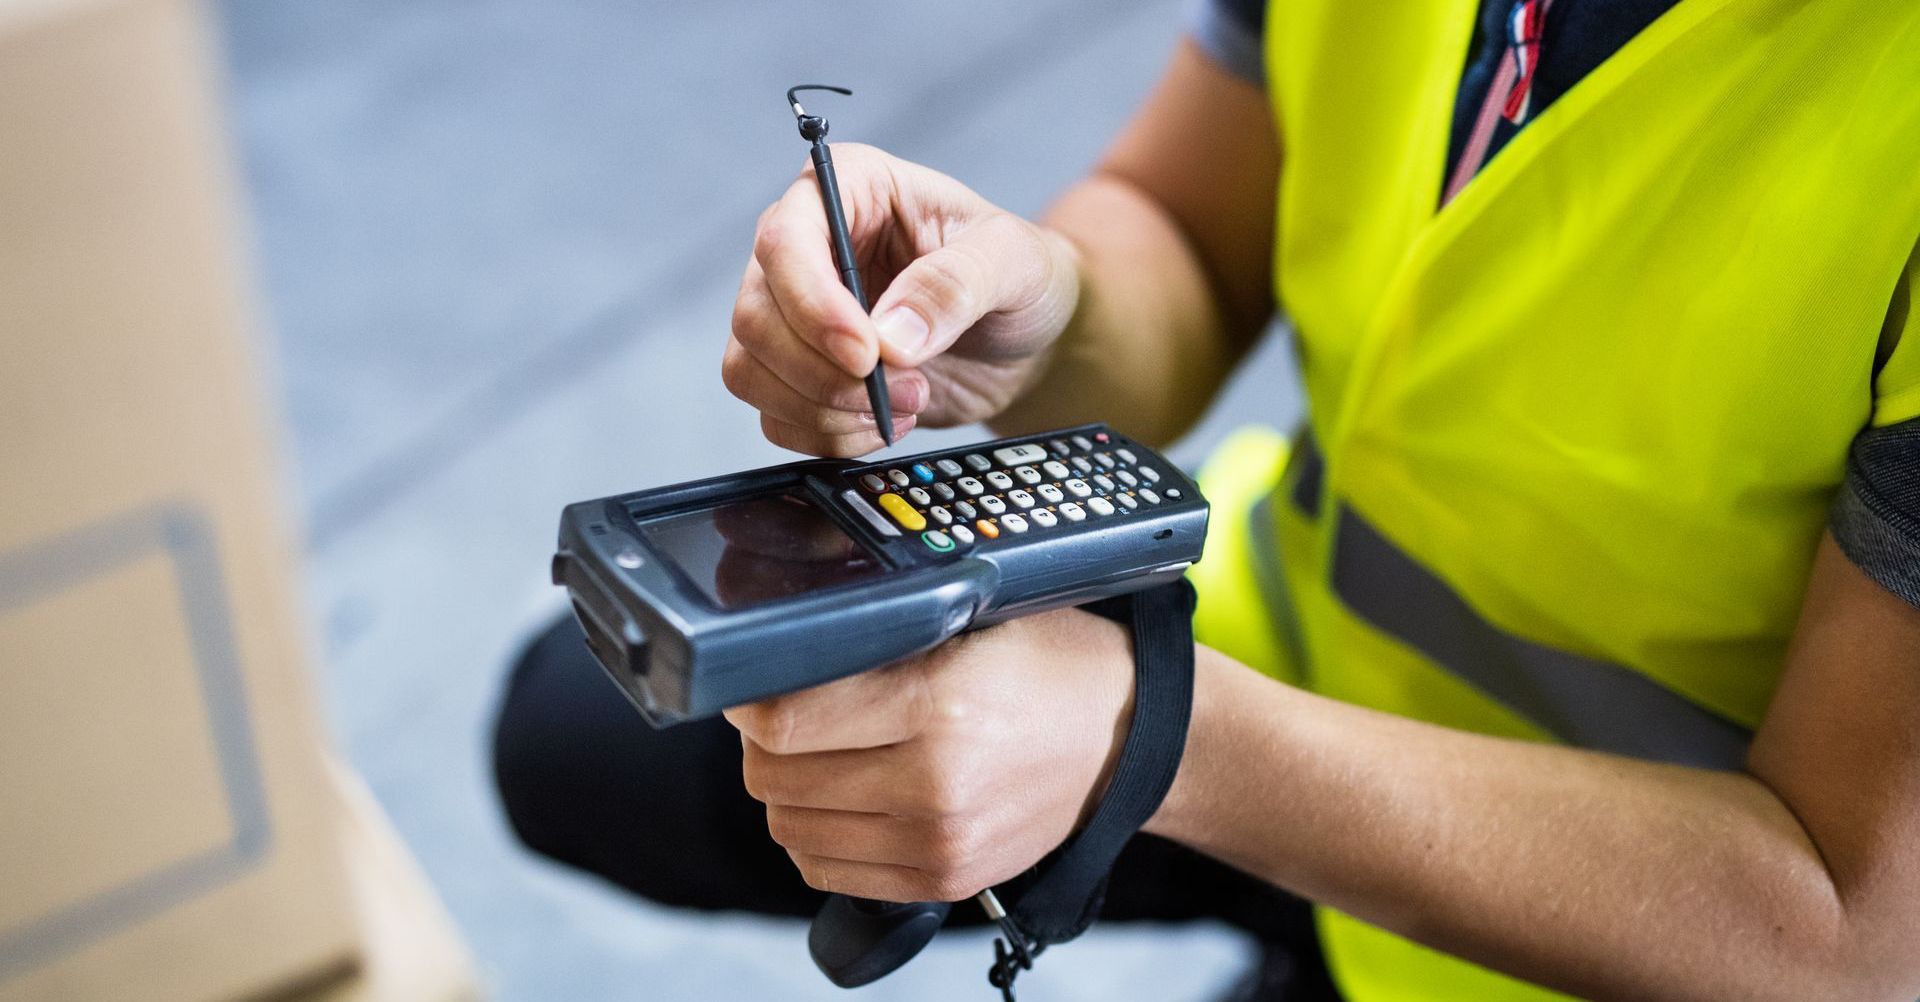 This is an image of a warehouse worker entering inventory information into a mobile scanner.